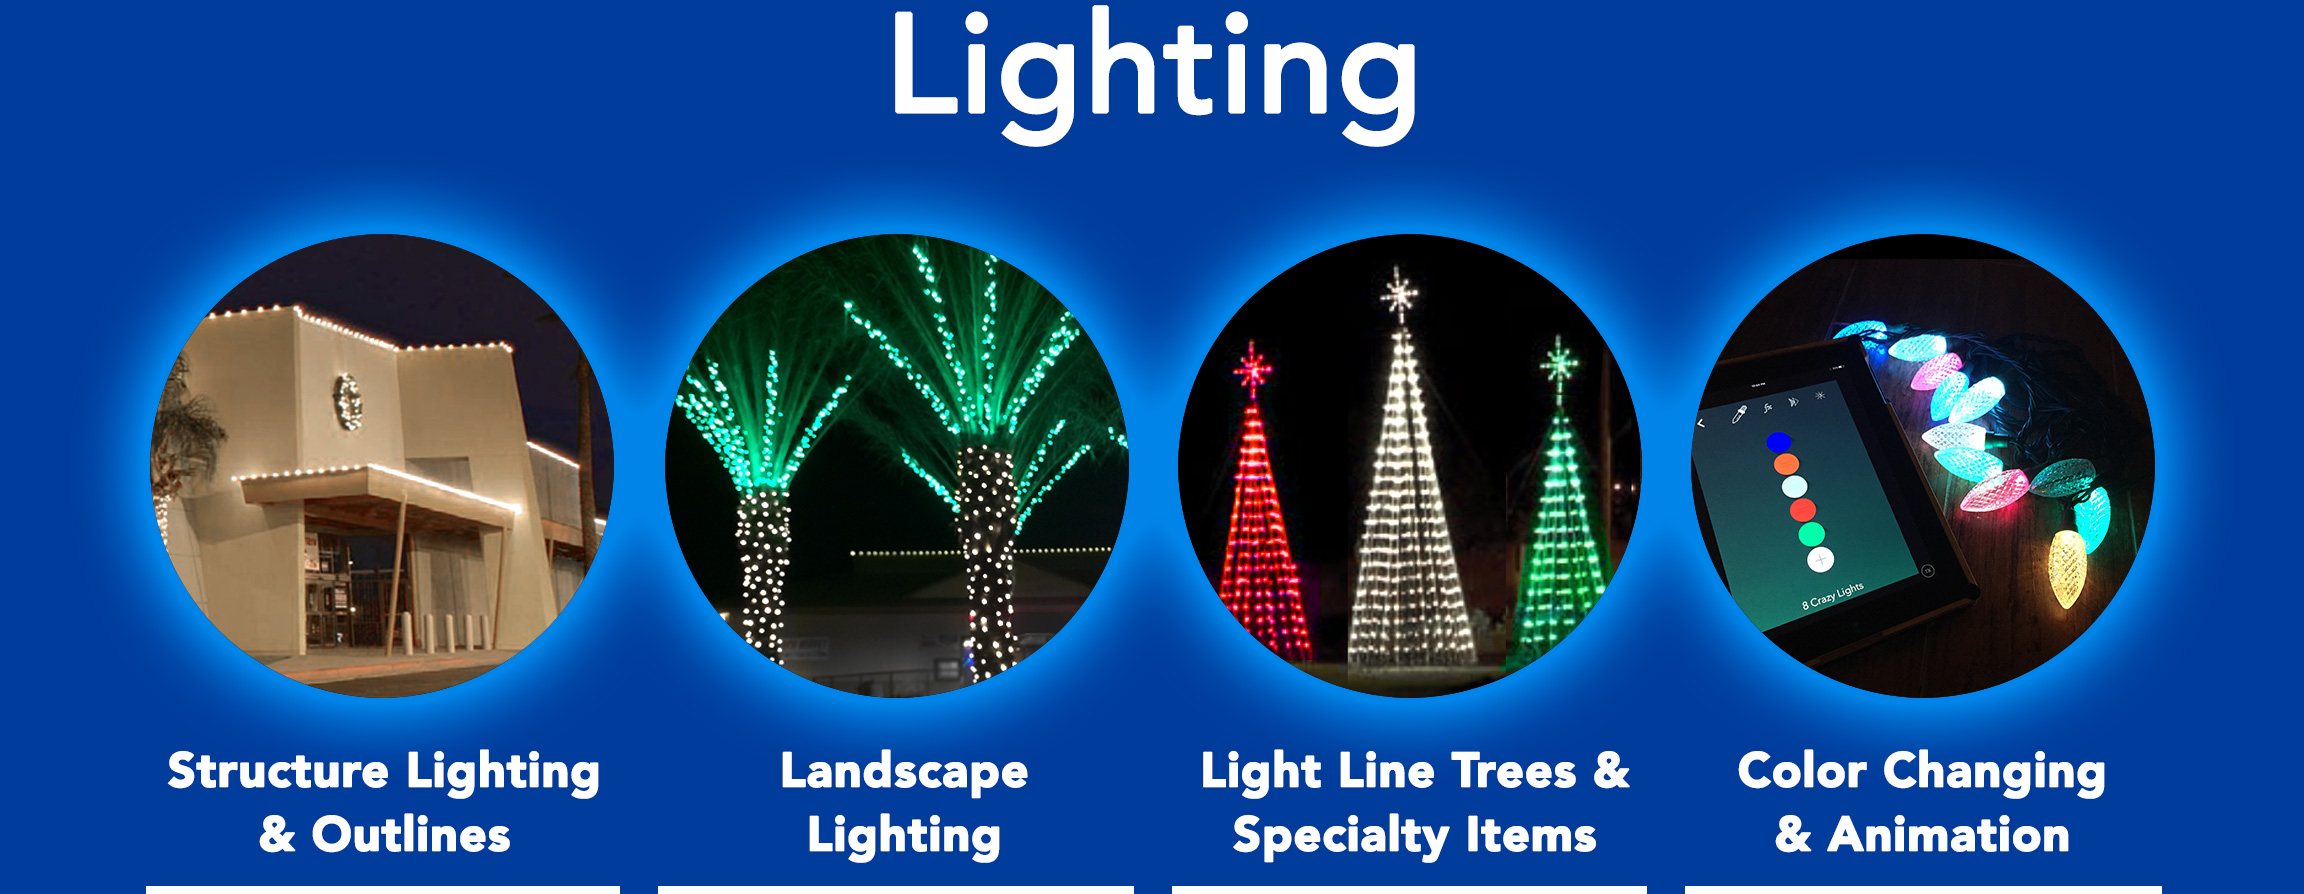 Structure Lighting & Building Outlines. Landcape Lighting. Light Line Trees & Specialty Lighted Items. Color changing LED lights and animated light shows.